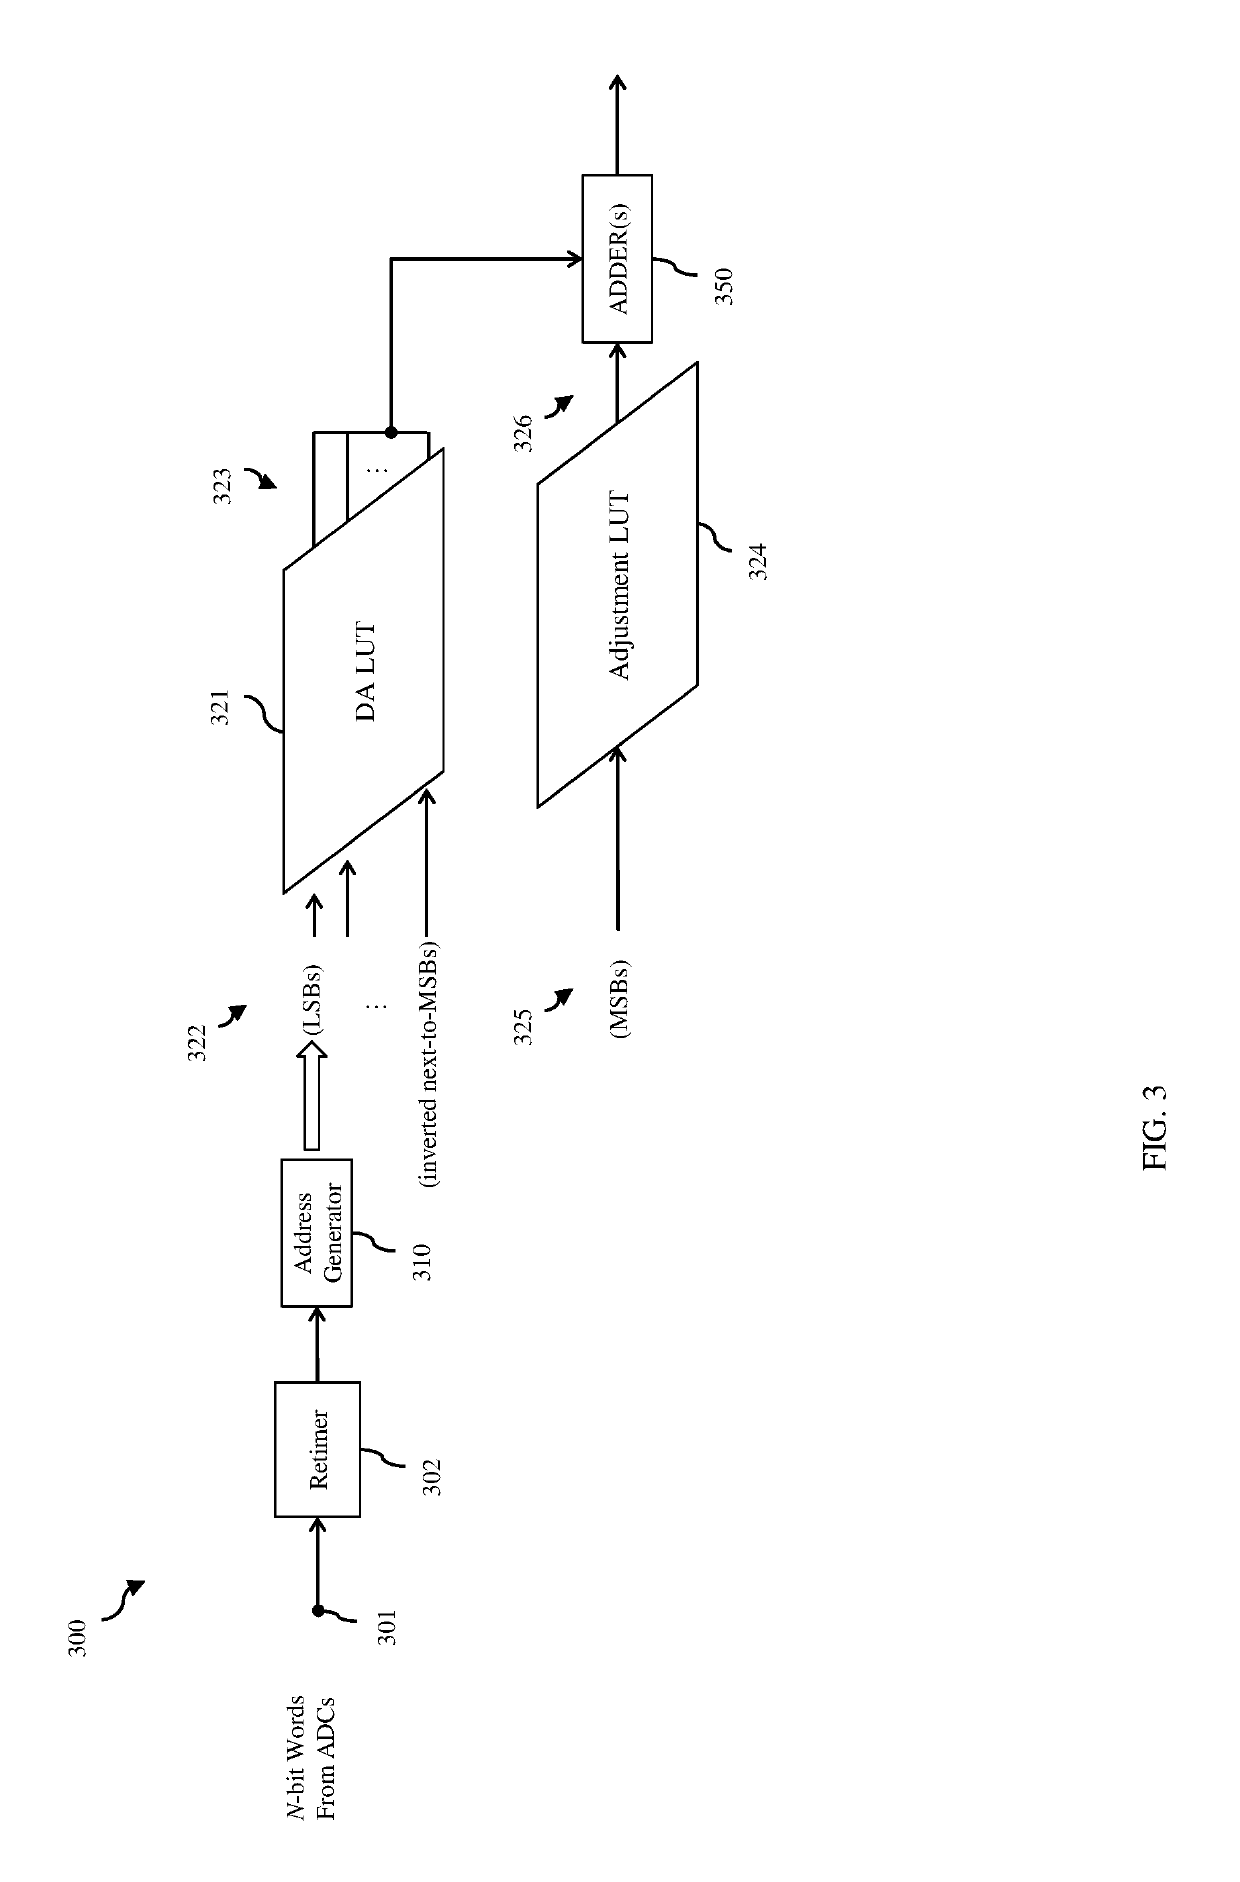 Feed forward equalizer with power-optimized distributed arithmetic architecture and method